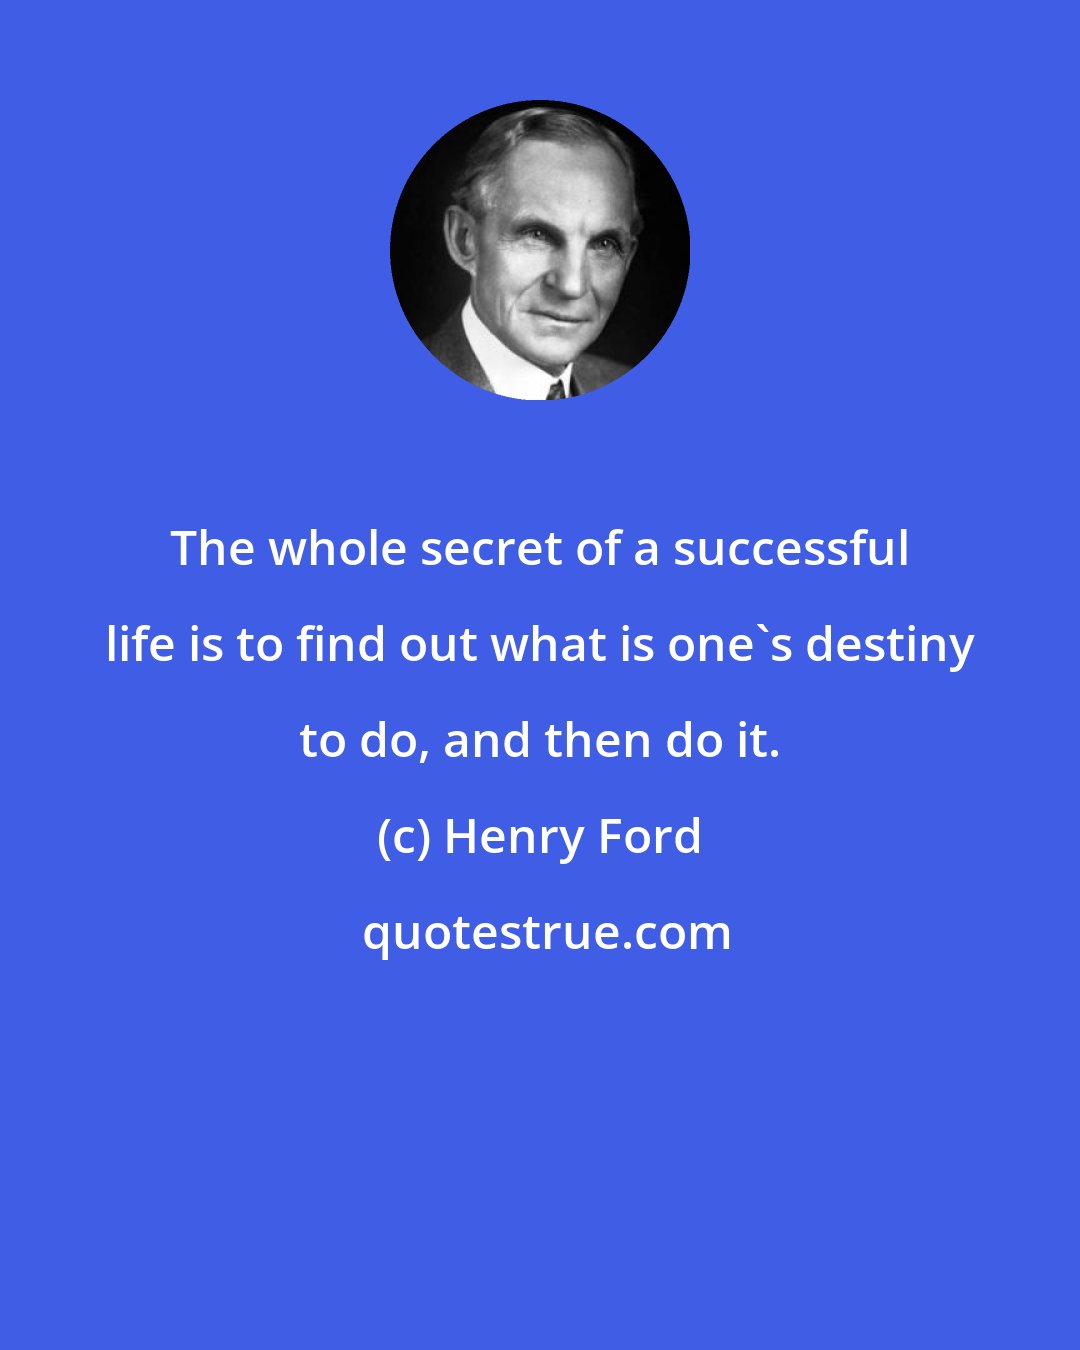 Henry Ford: The whole secret of a successful life is to find out what is one's destiny to do, and then do it.